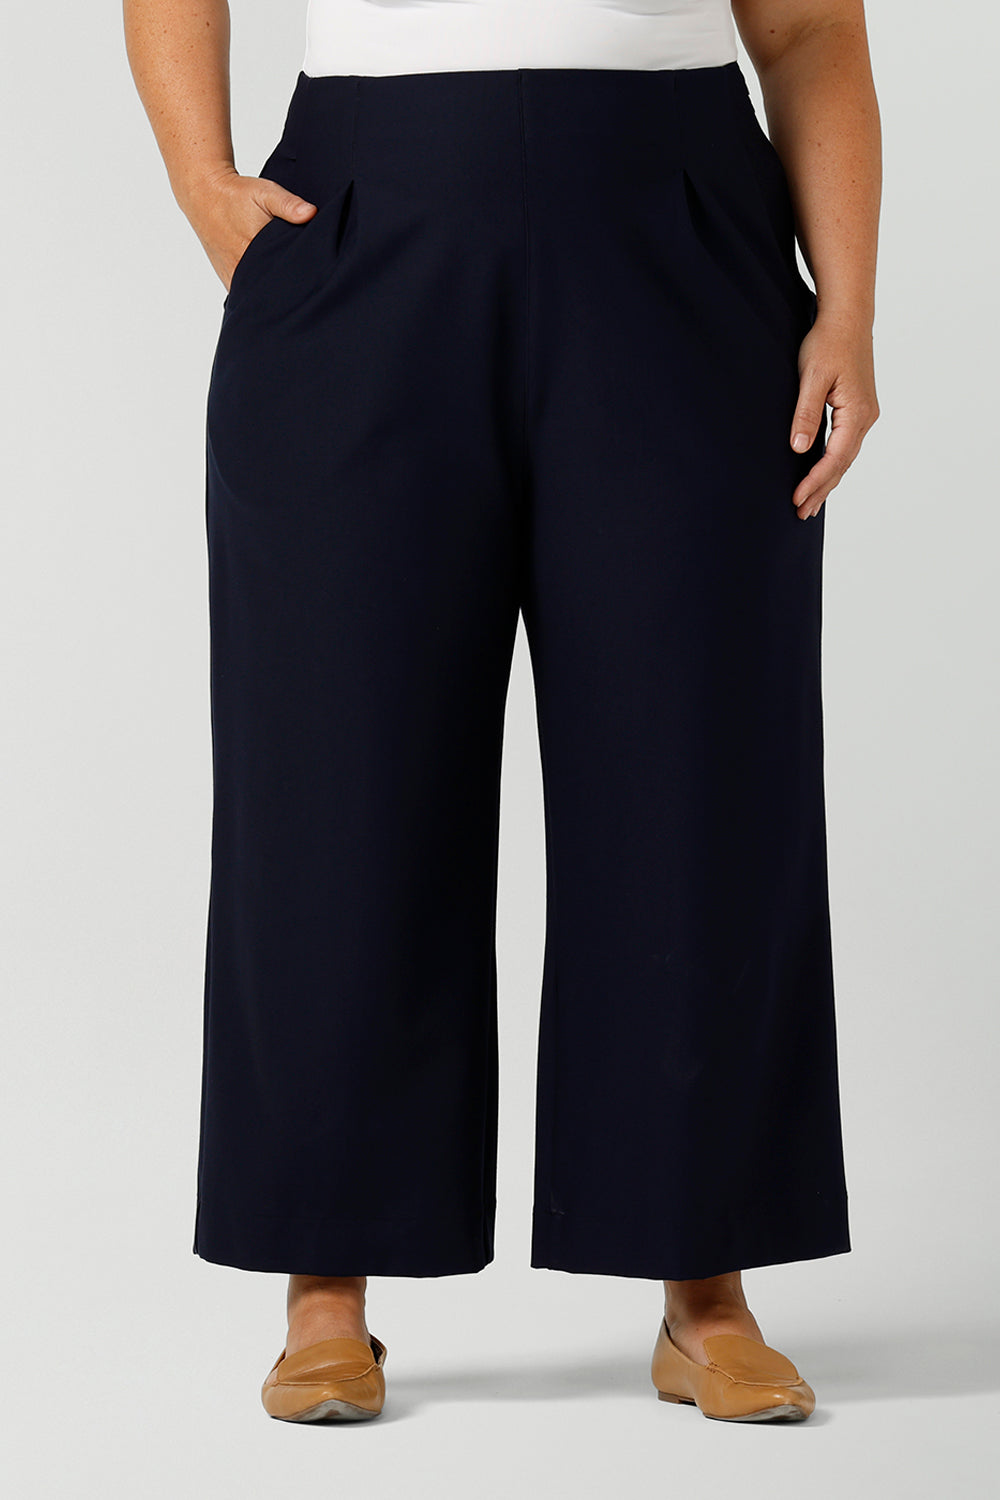 Wide-leg, cropped length Hollis Culotte Pant in Navy blue. Featuring front pleats, side pockets and stretch jersey fabric these are comfortable, plus size work pants. This tailored trouser delivers quality office wear to women in sizes 8 to 24. - shop now at Australian ladies clothing brand, Leina & Fleur's online boutique.